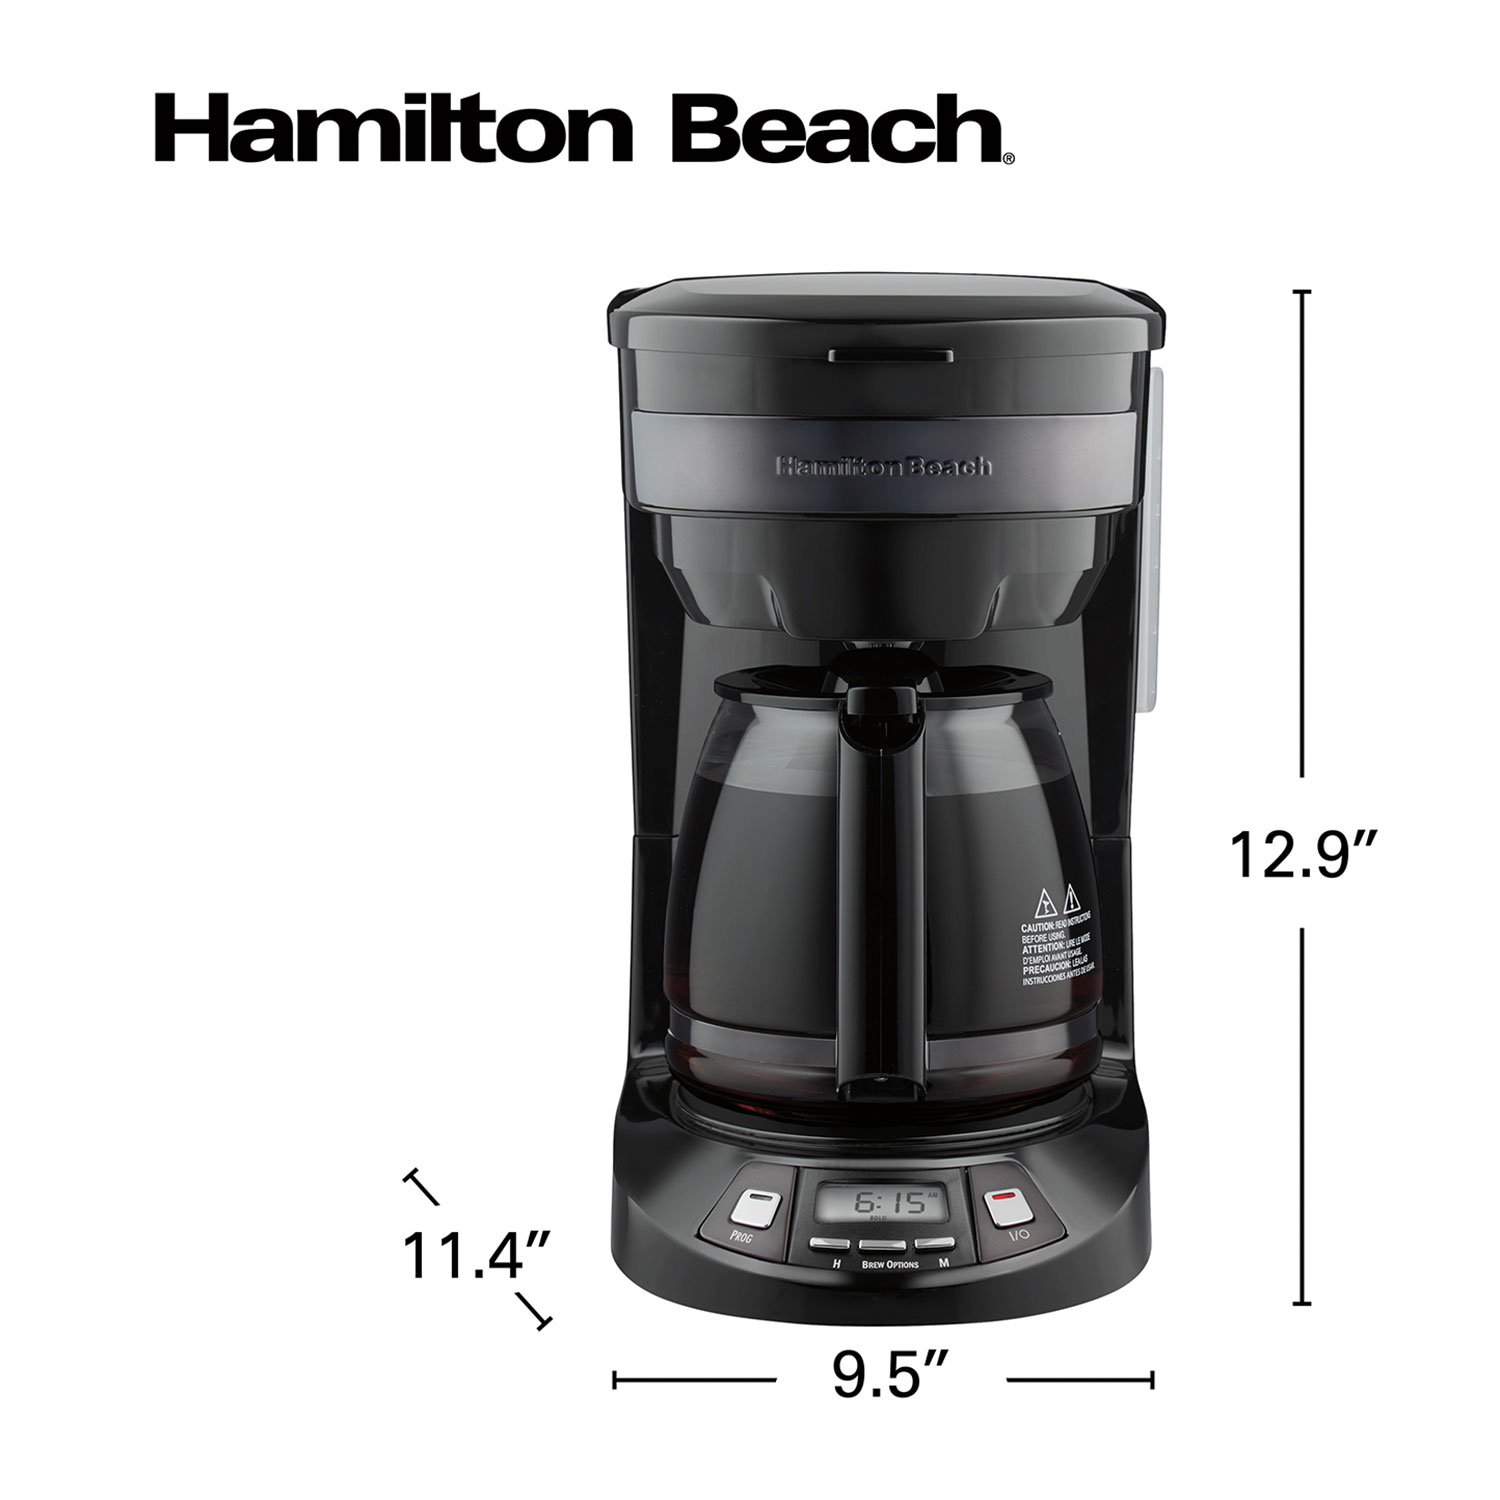  Hamilton Beach 12 Cup Programmable Drip Coffee Maker with 3  Brew Options, Glass Carafe, Auto Pause and Pour, Black with Stainless  Accents (46299): Home & Kitchen